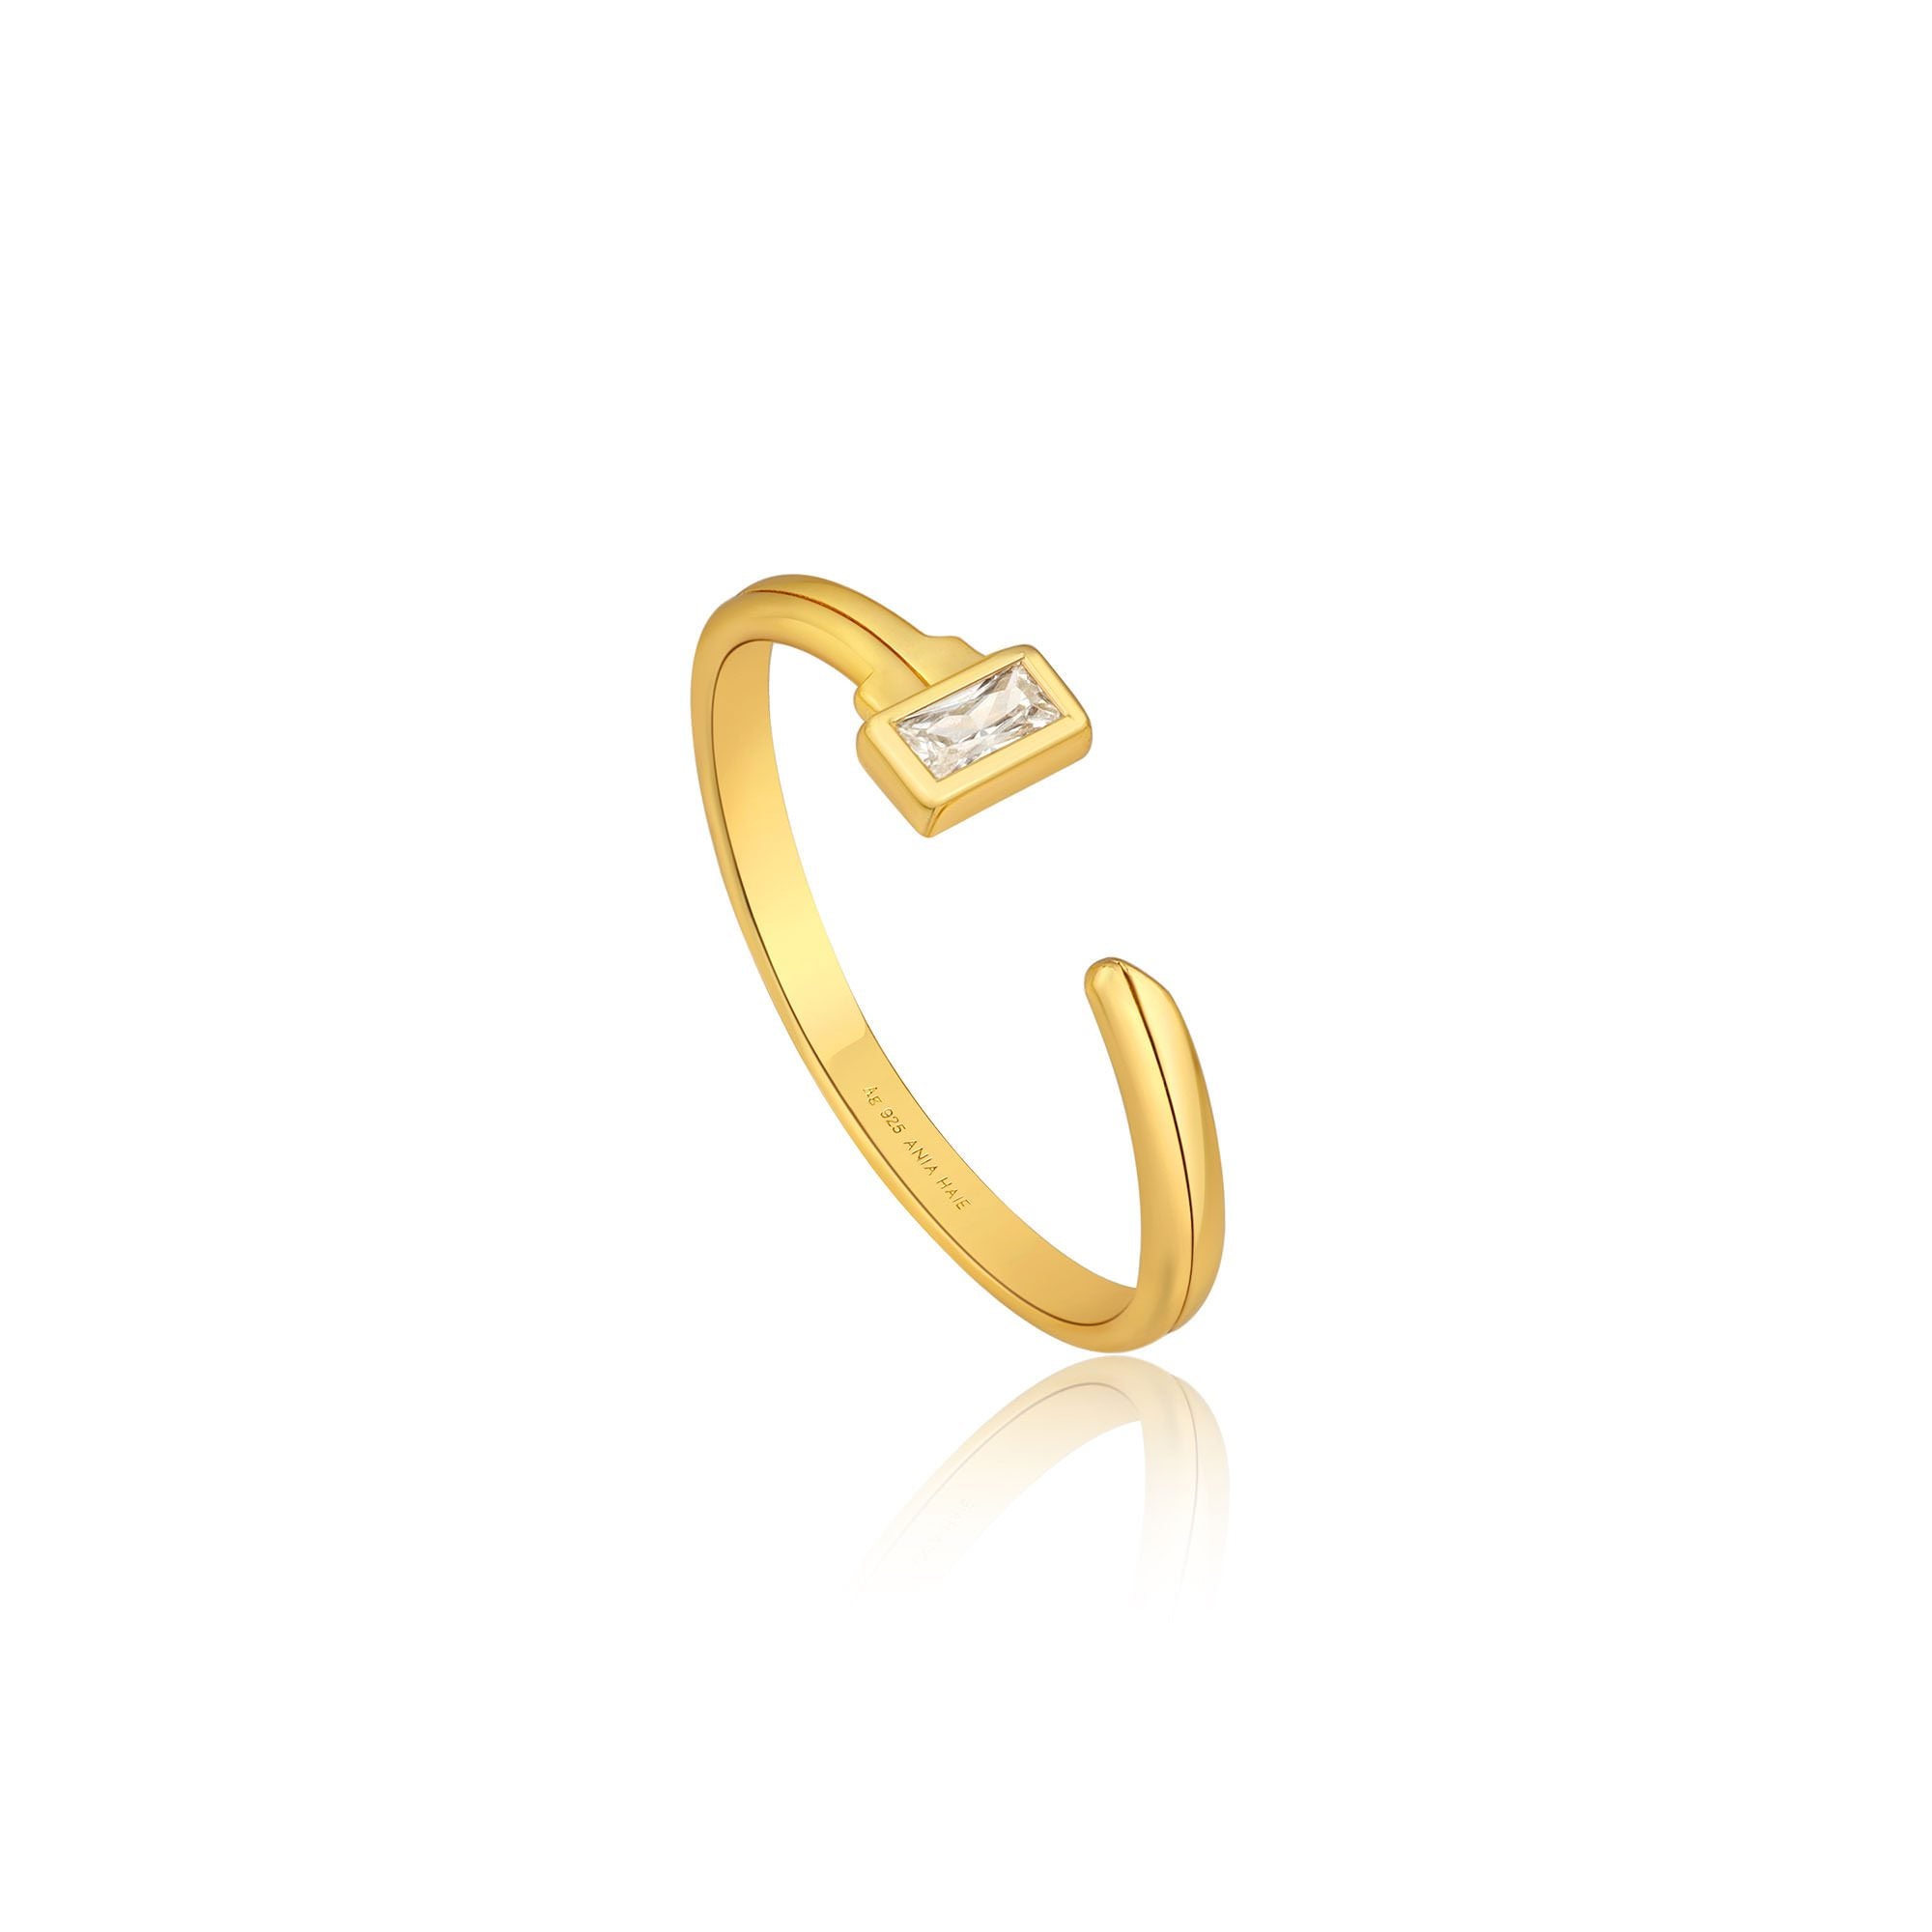 Ania Haie Gold or Silver Key Adjustable Ring